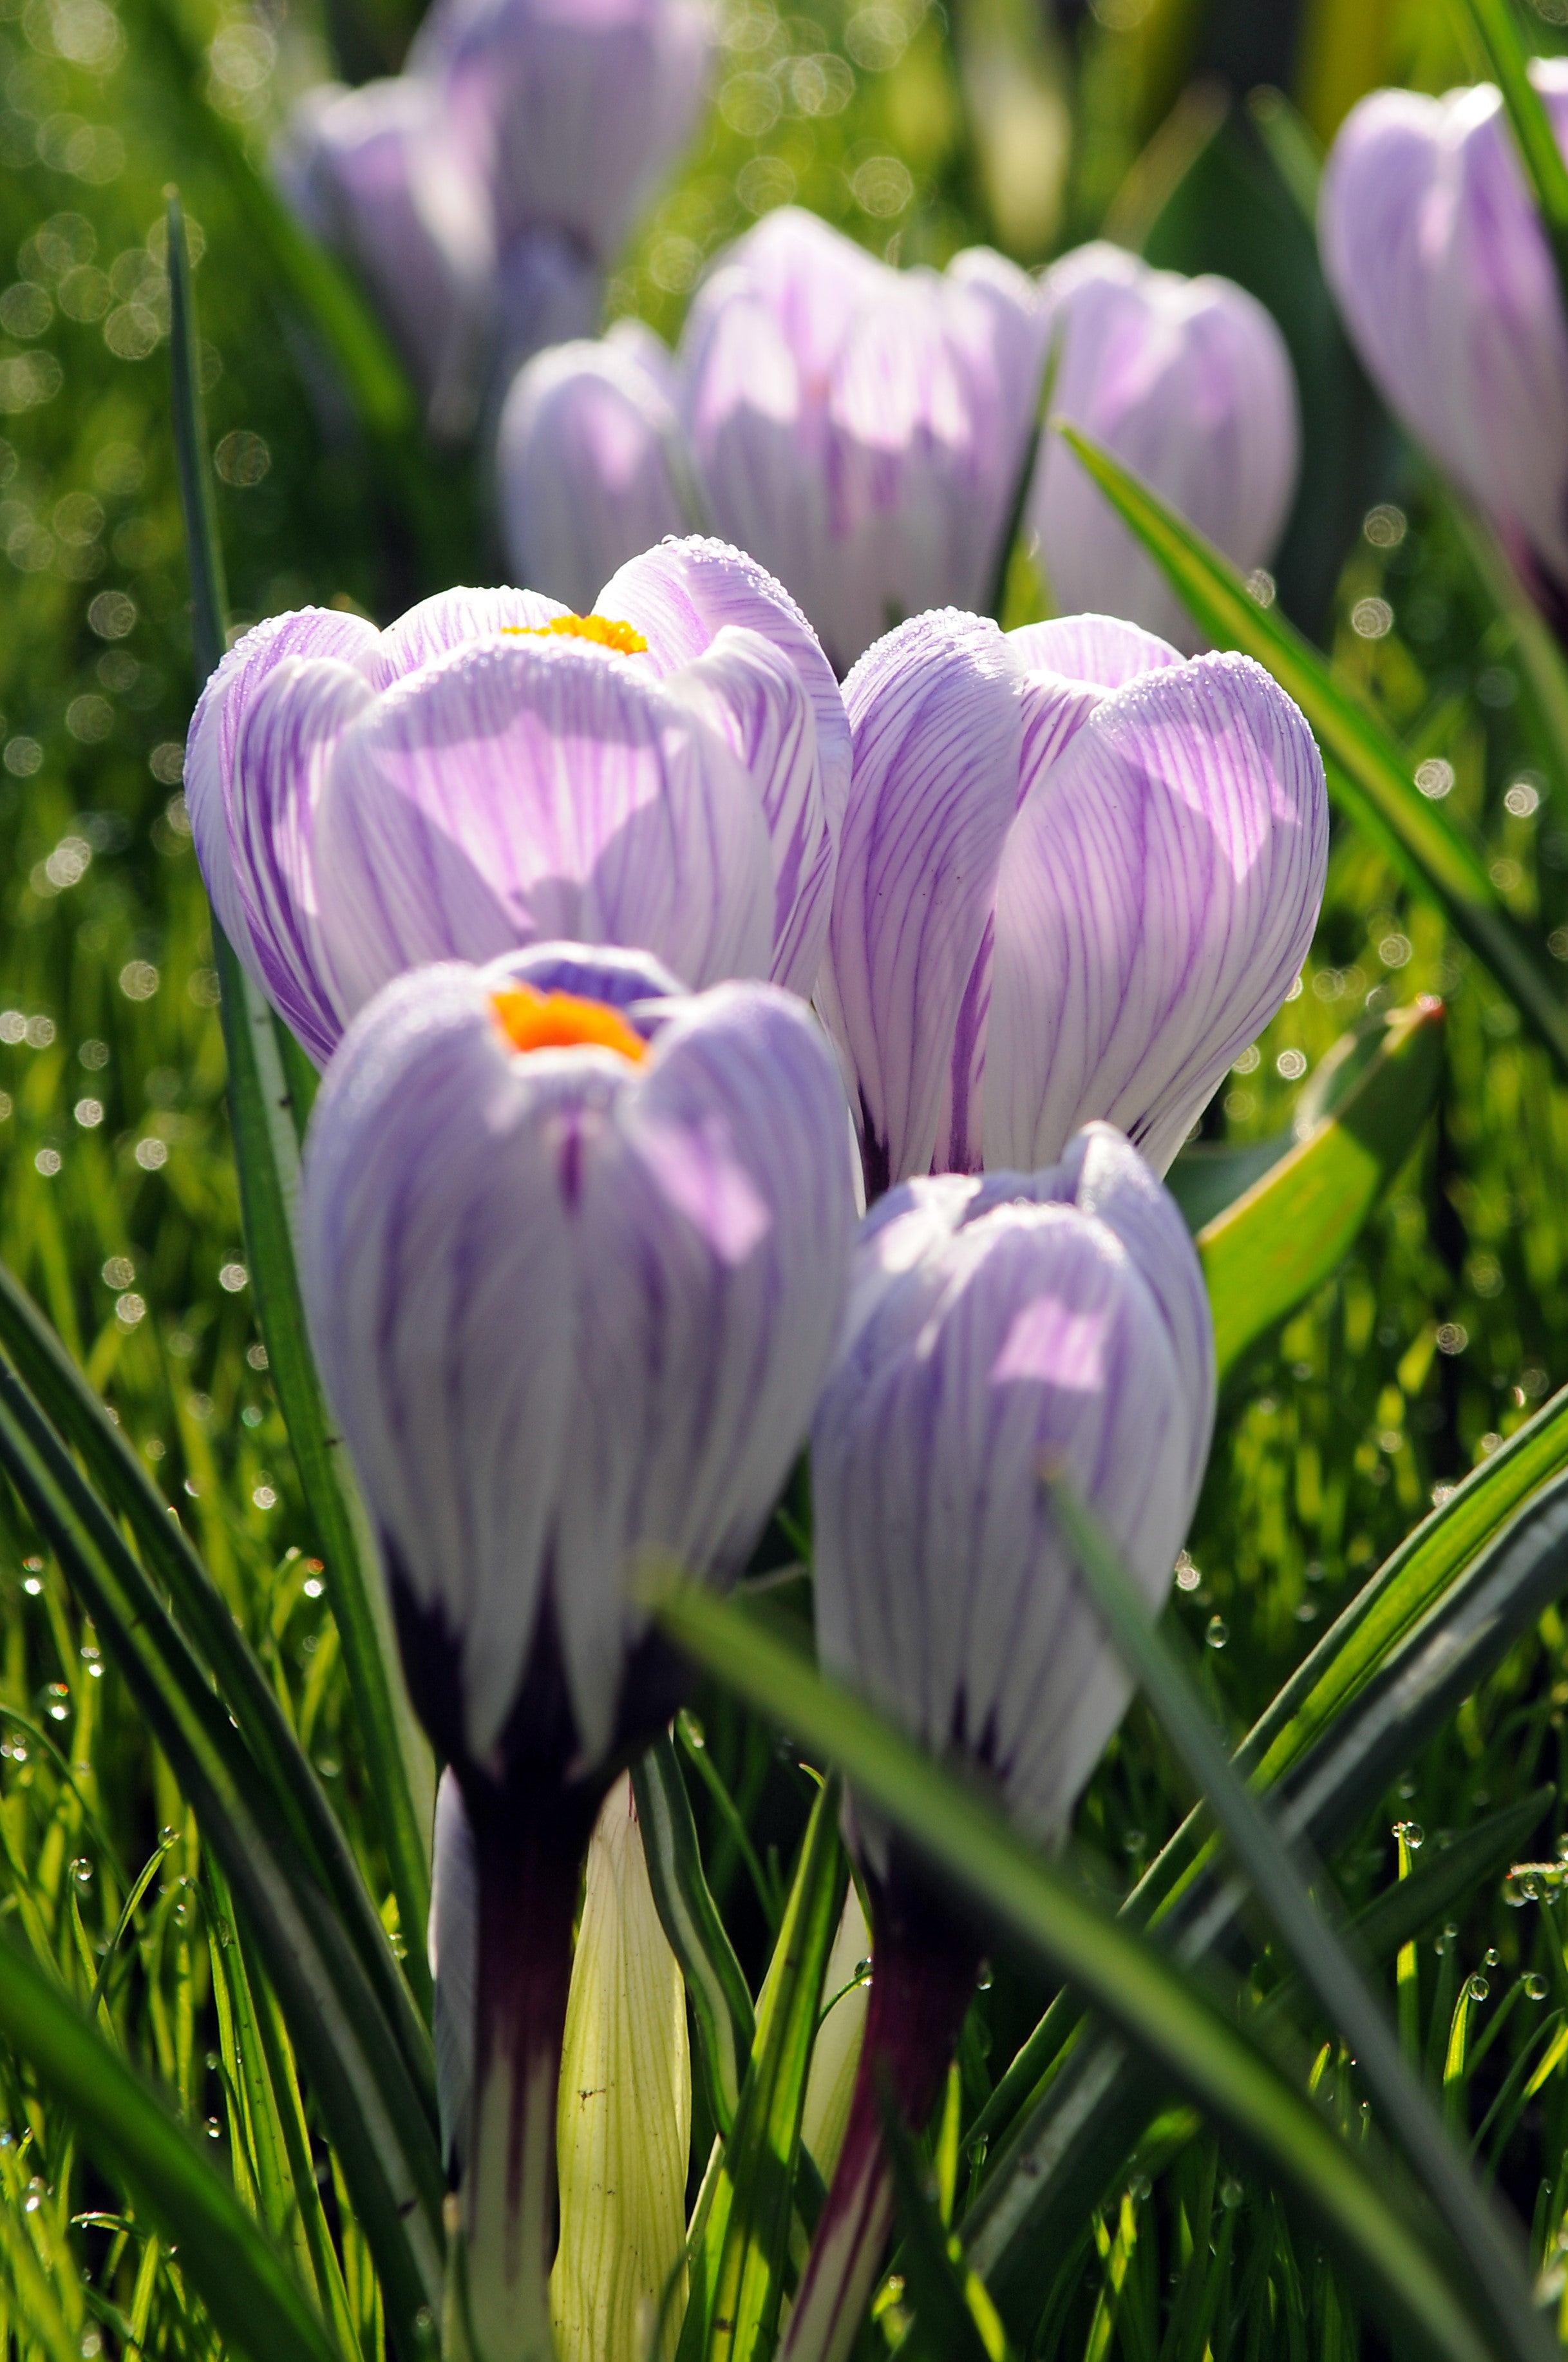 Delicate Pickwick crocus: purple and white petals bring spring charm.